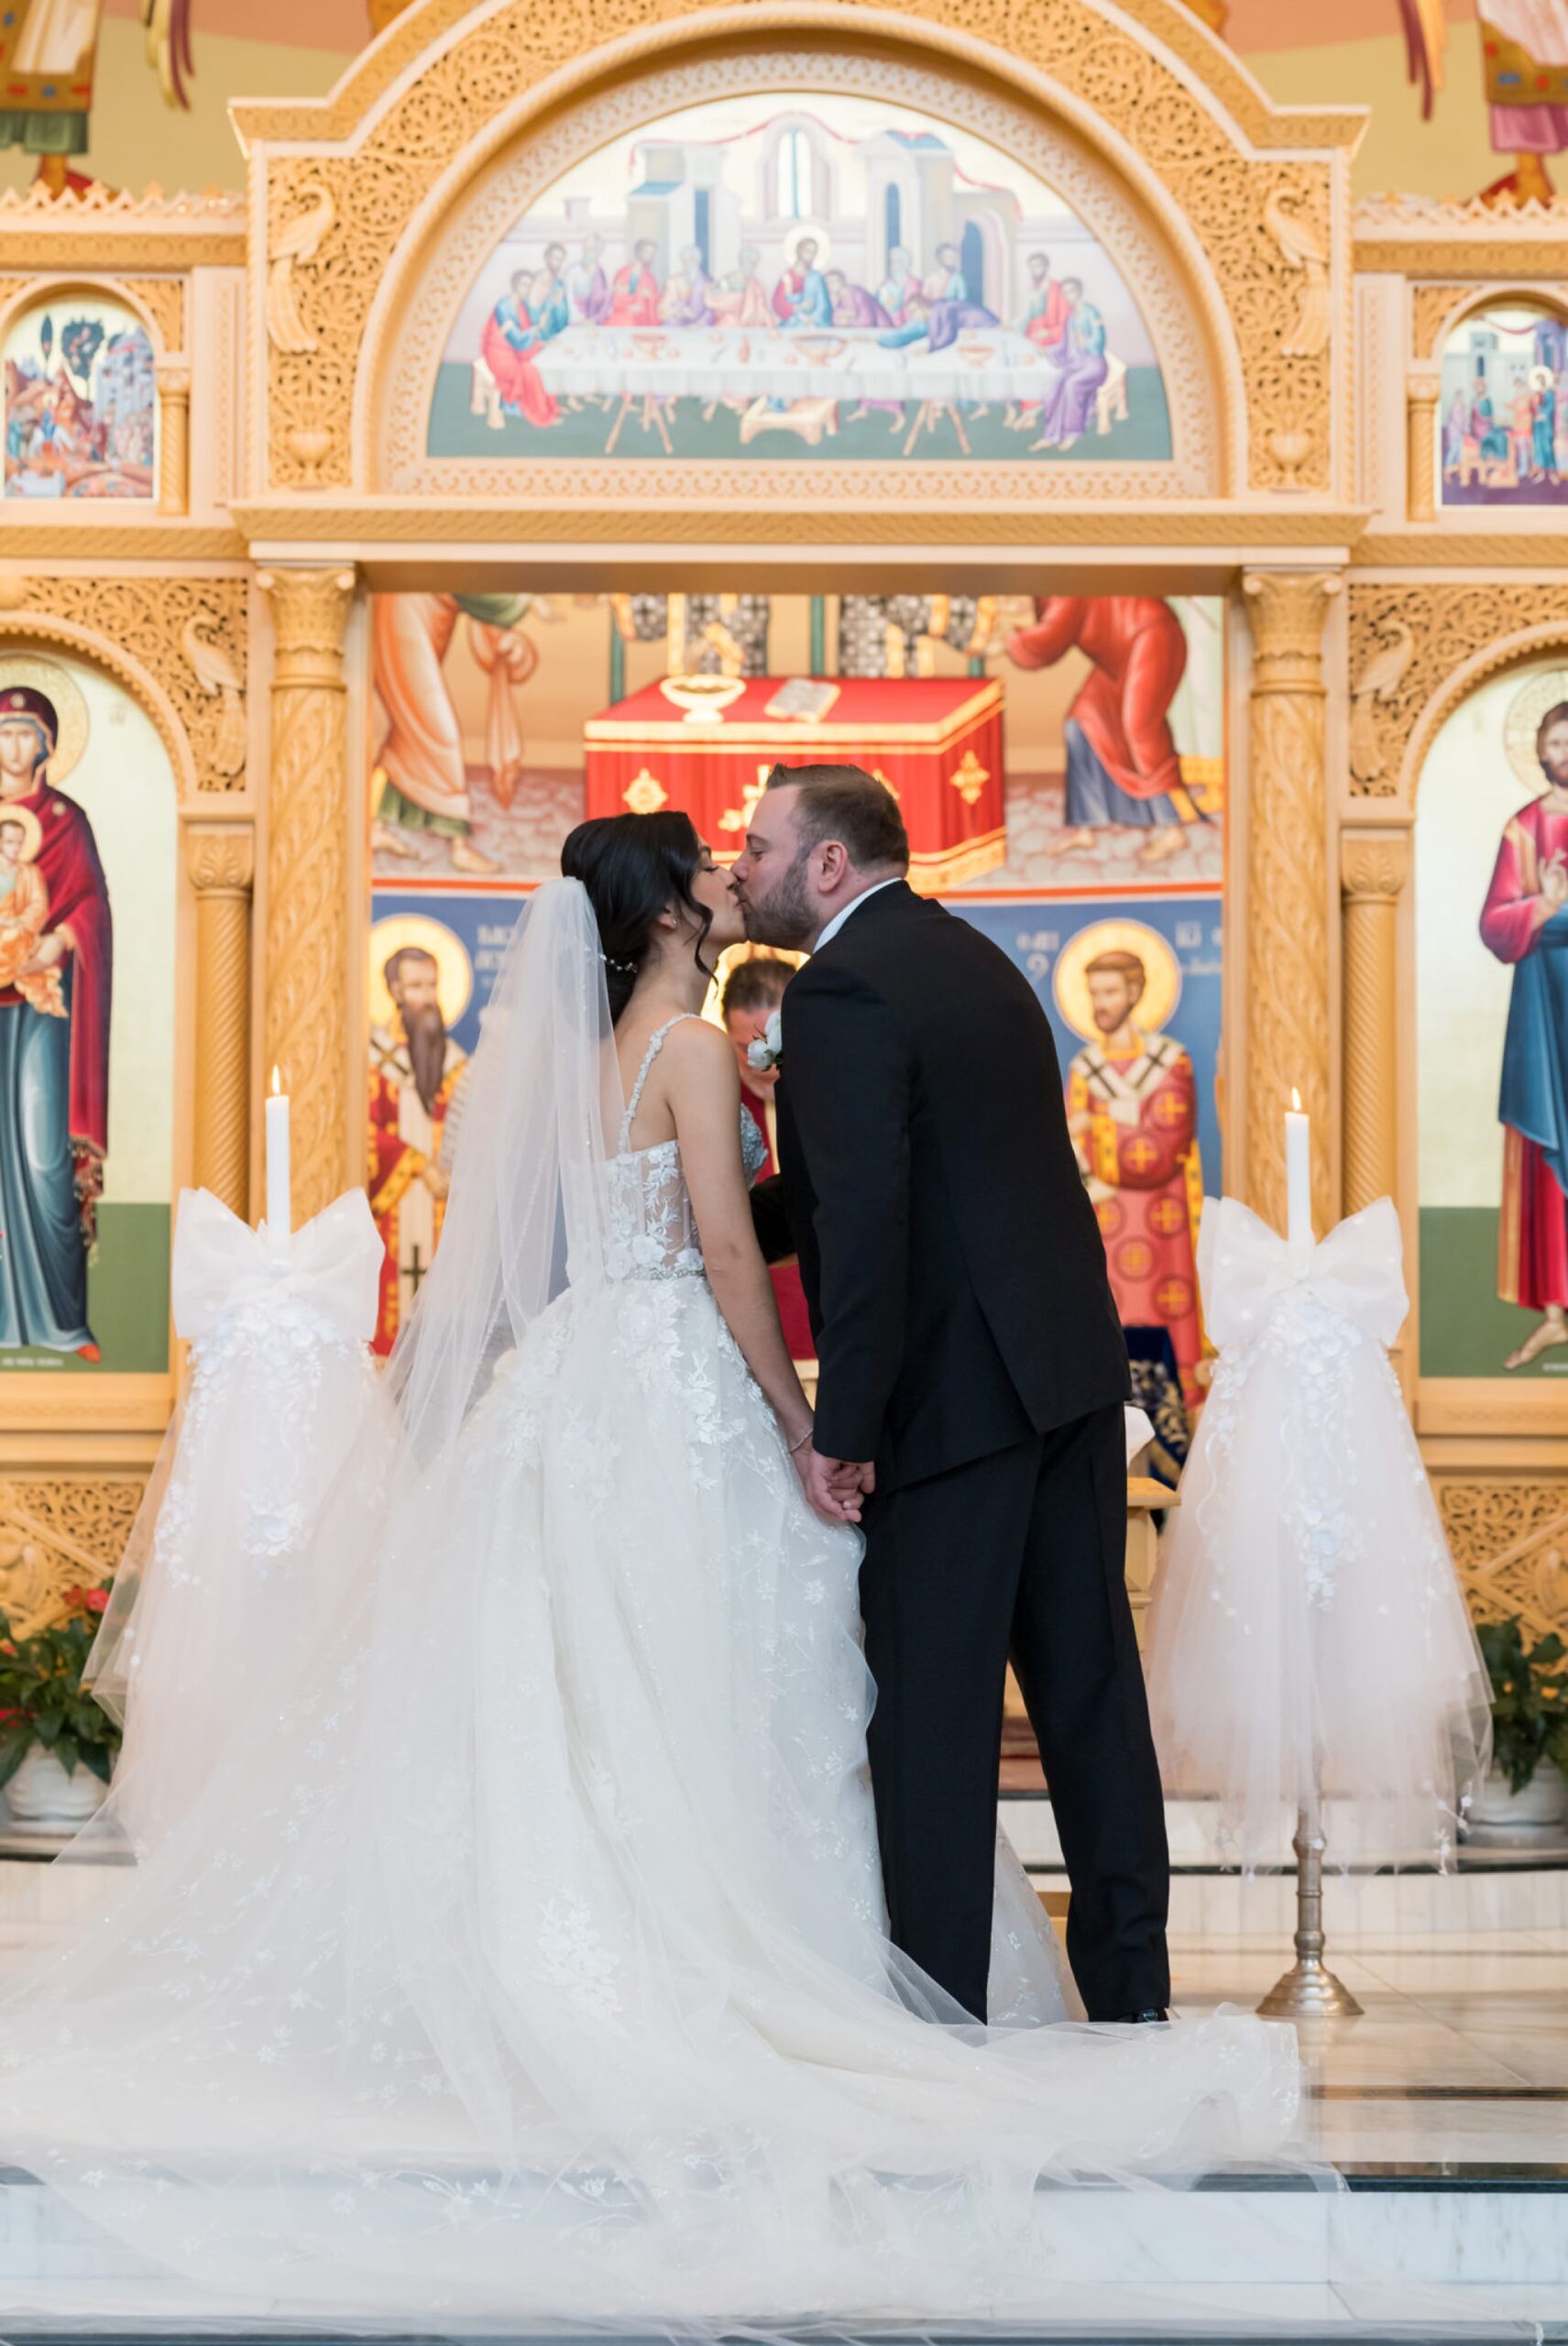 A bride and groom kiss at the altar of their Assumption Greek Orthodox wedding in St. Clair Shores, Michigan.